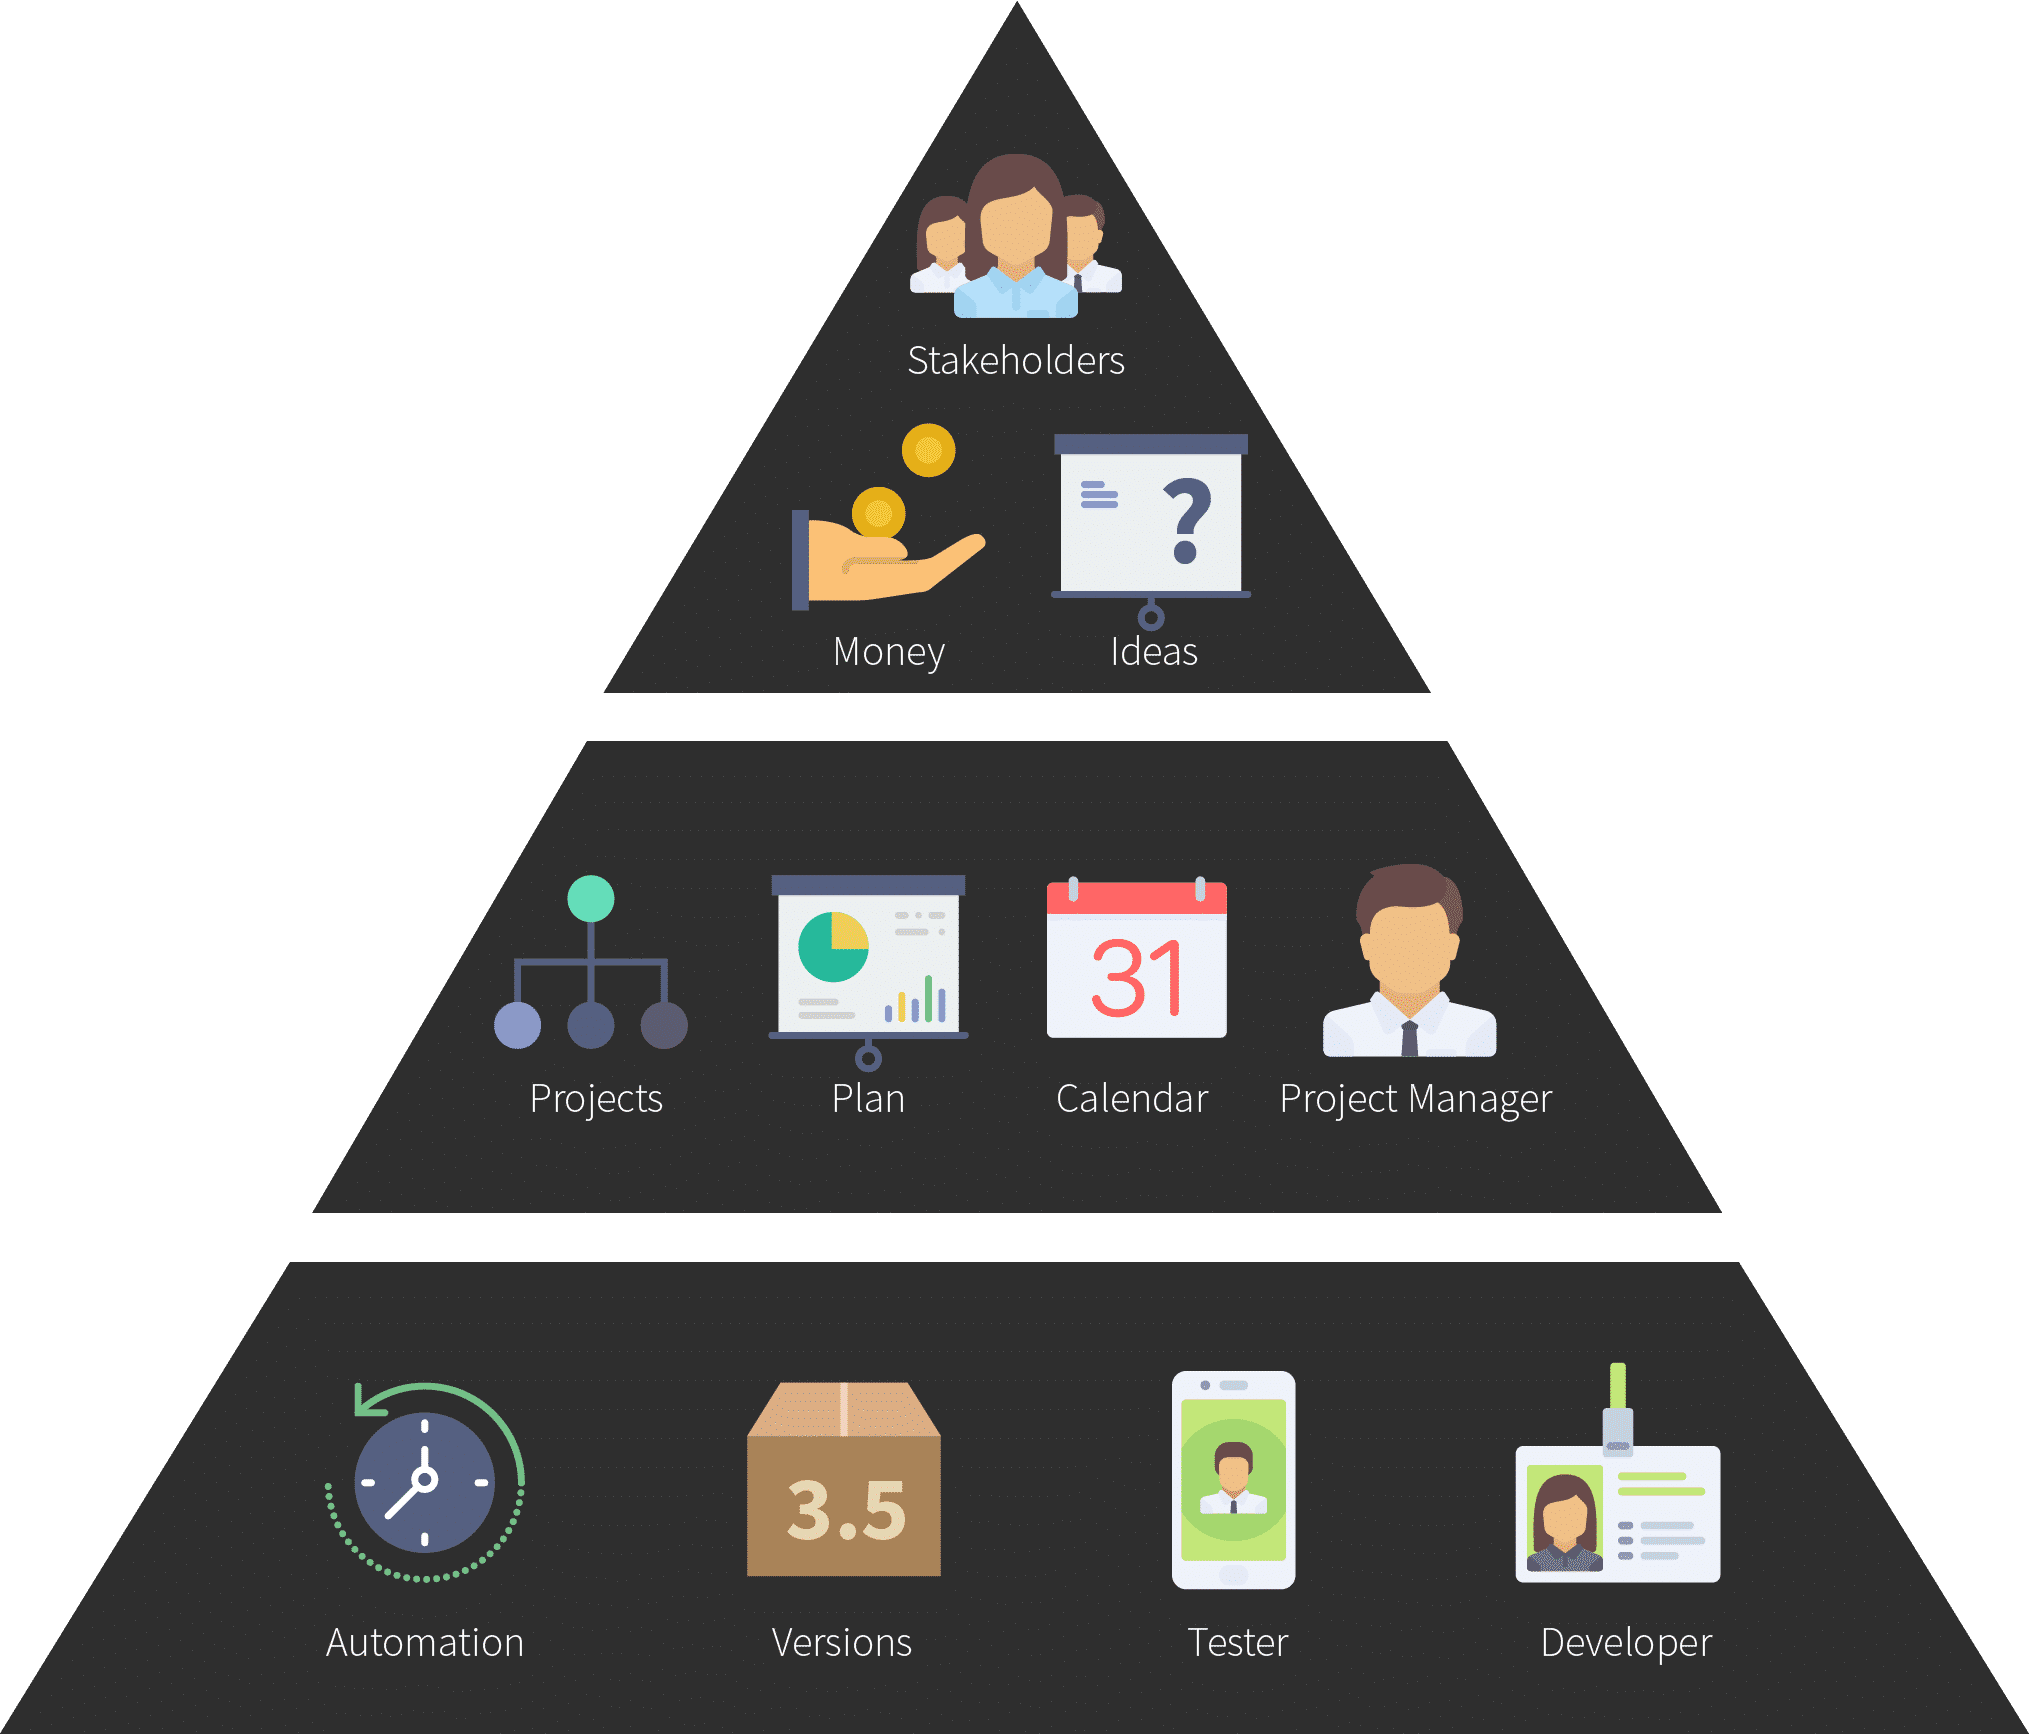 The Enterprise Release Management Pyramid. Bottom has automation, versions, tester, and developer. Middle has projects, plan, calendar, project manager. Top has money, ideas, and stakeholders.